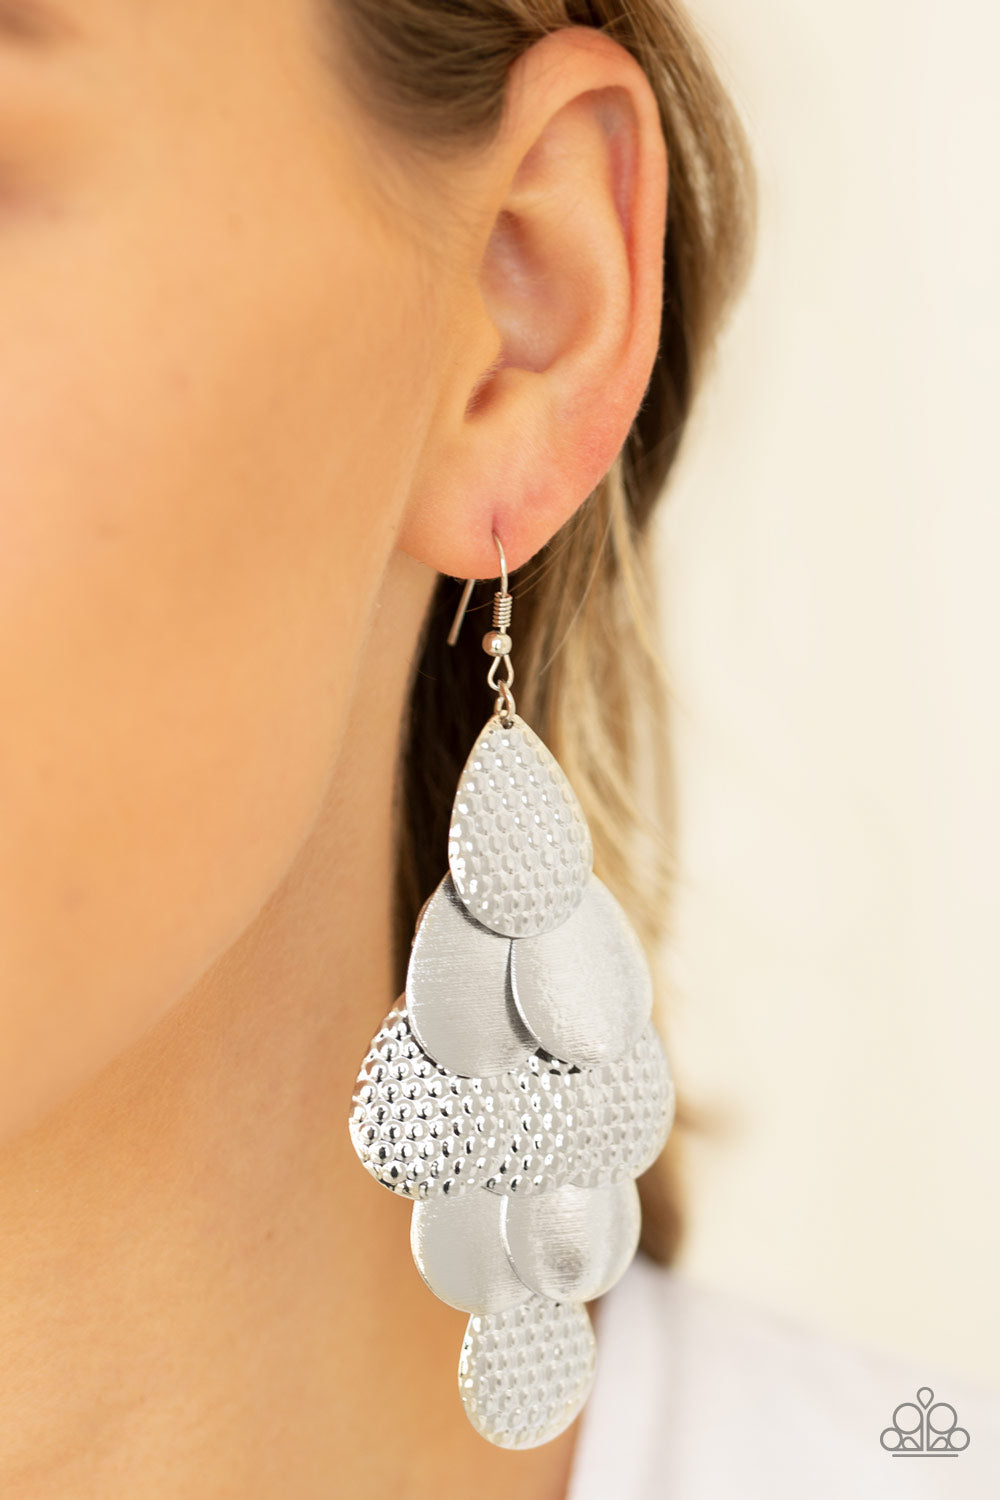 Chime Time - Silver - Earrings - Paparazzi Accessories